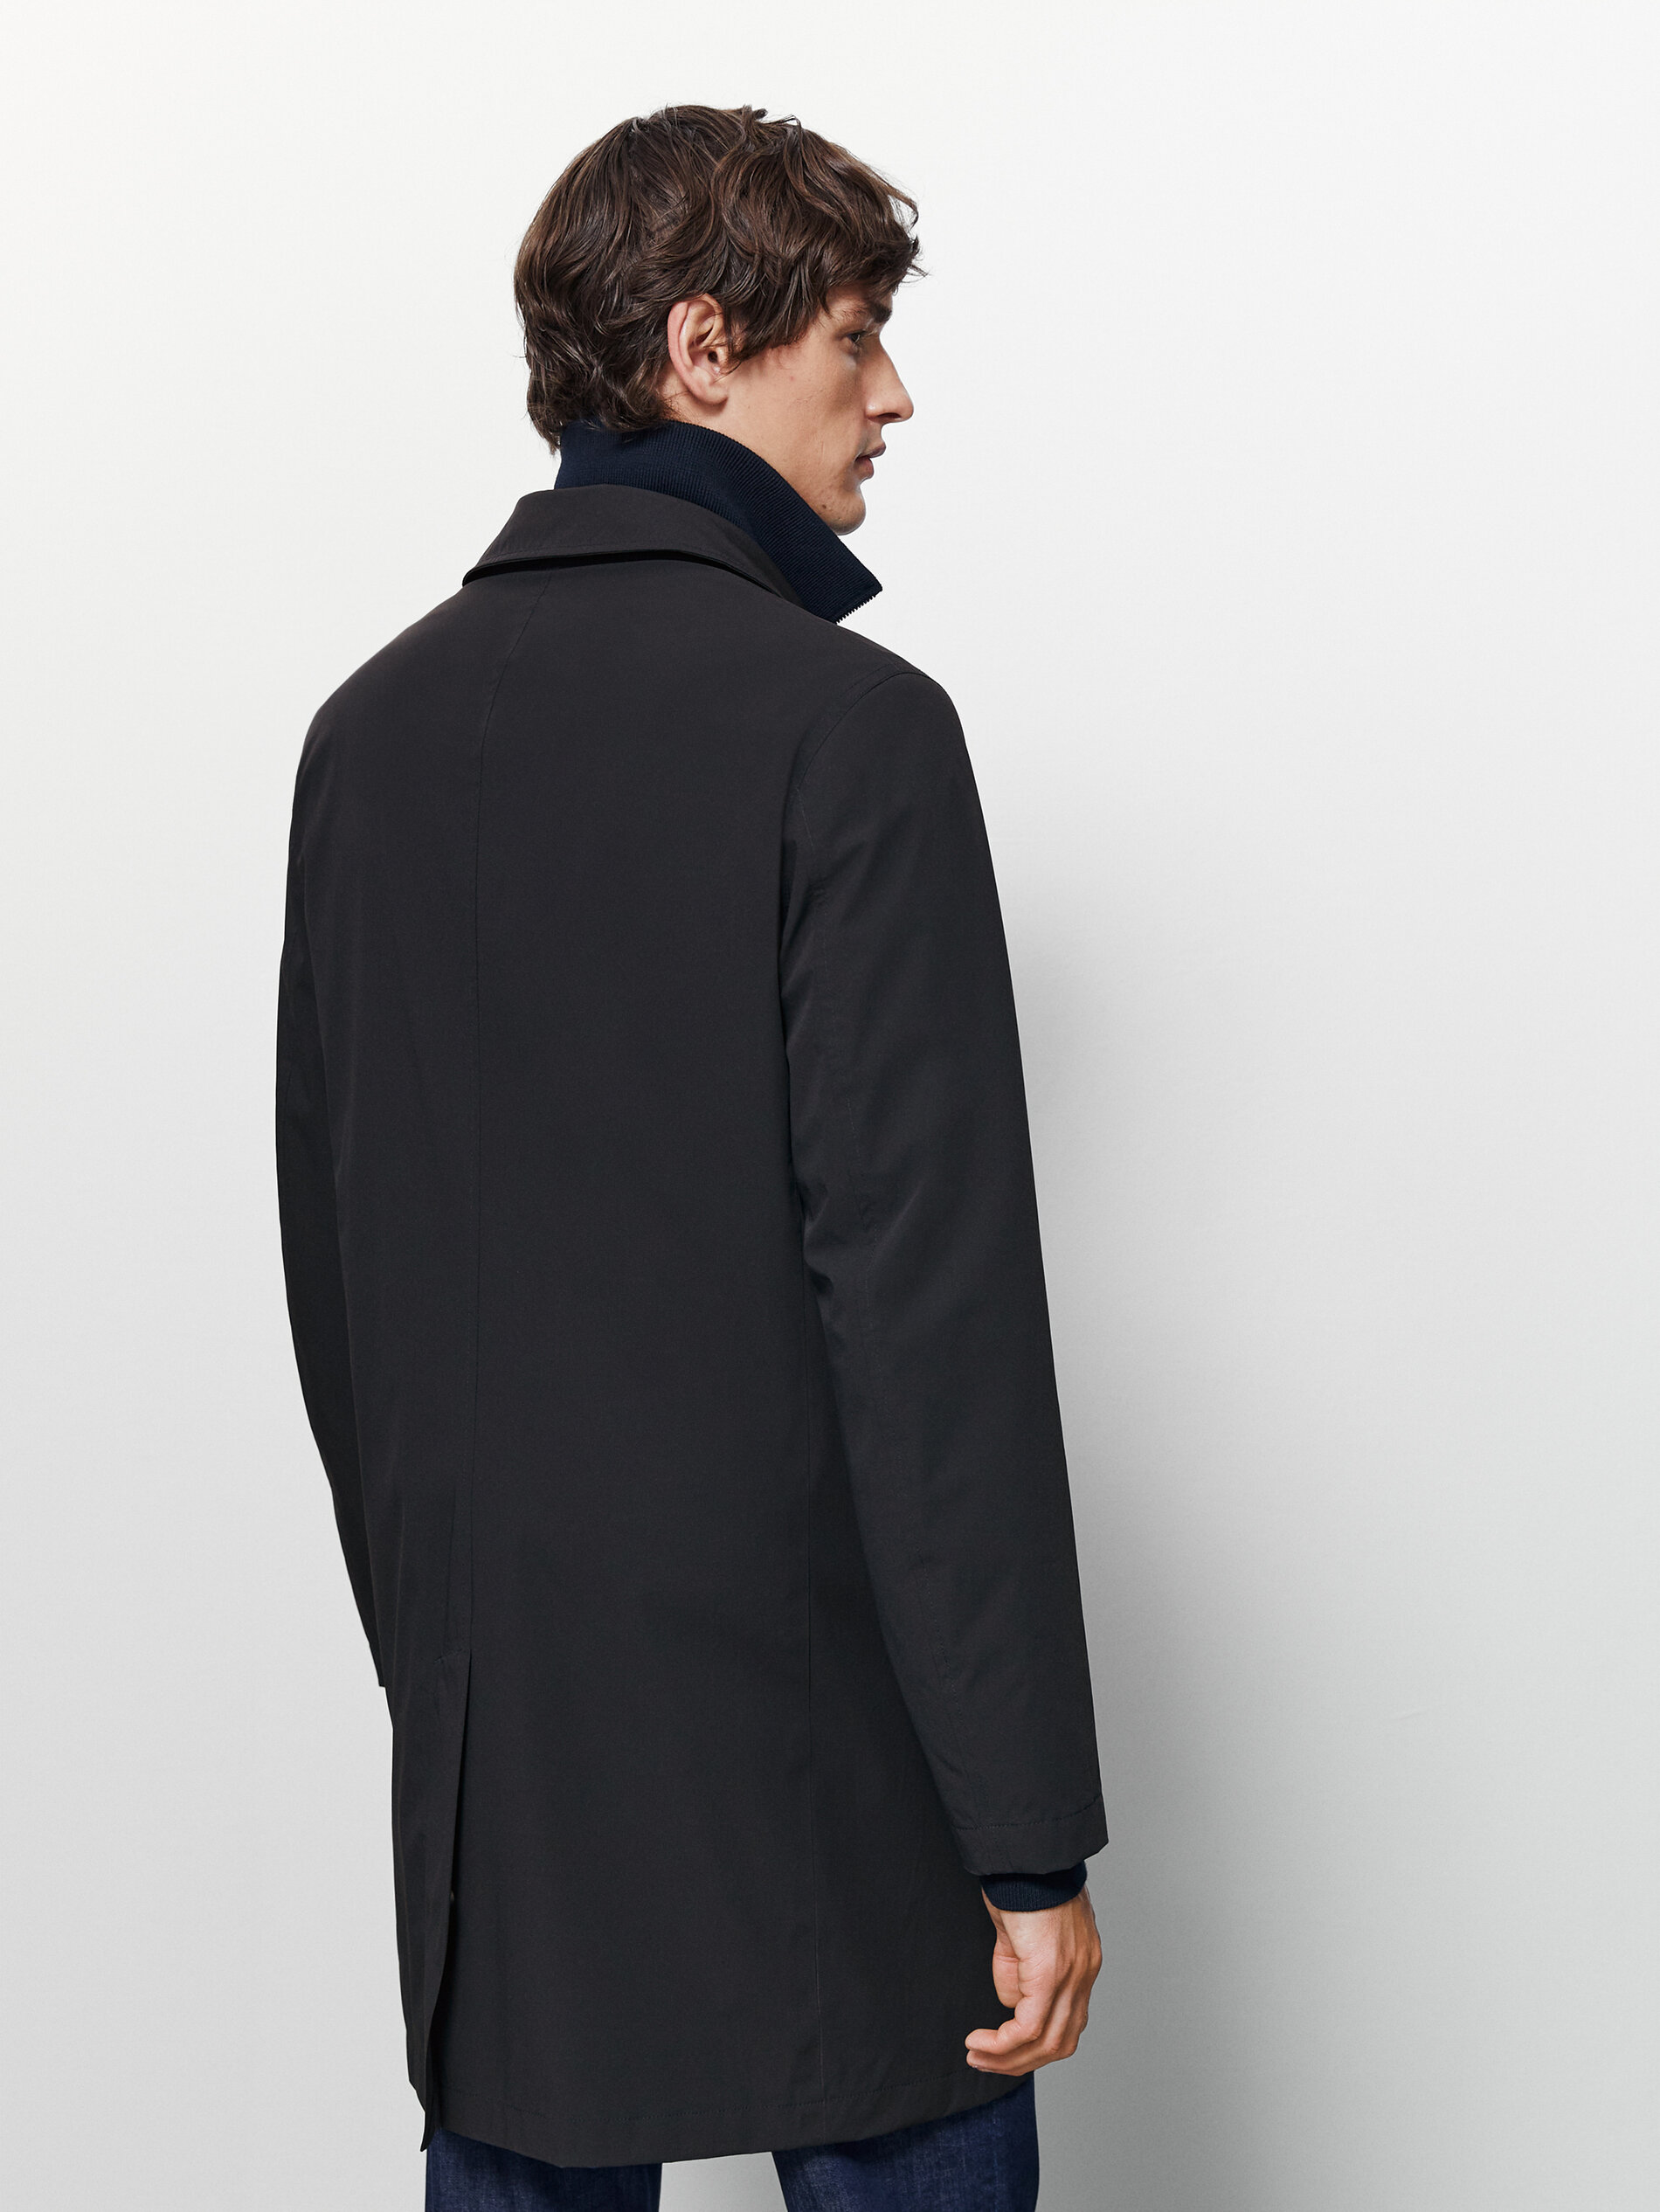 Navy blue technical trench coat